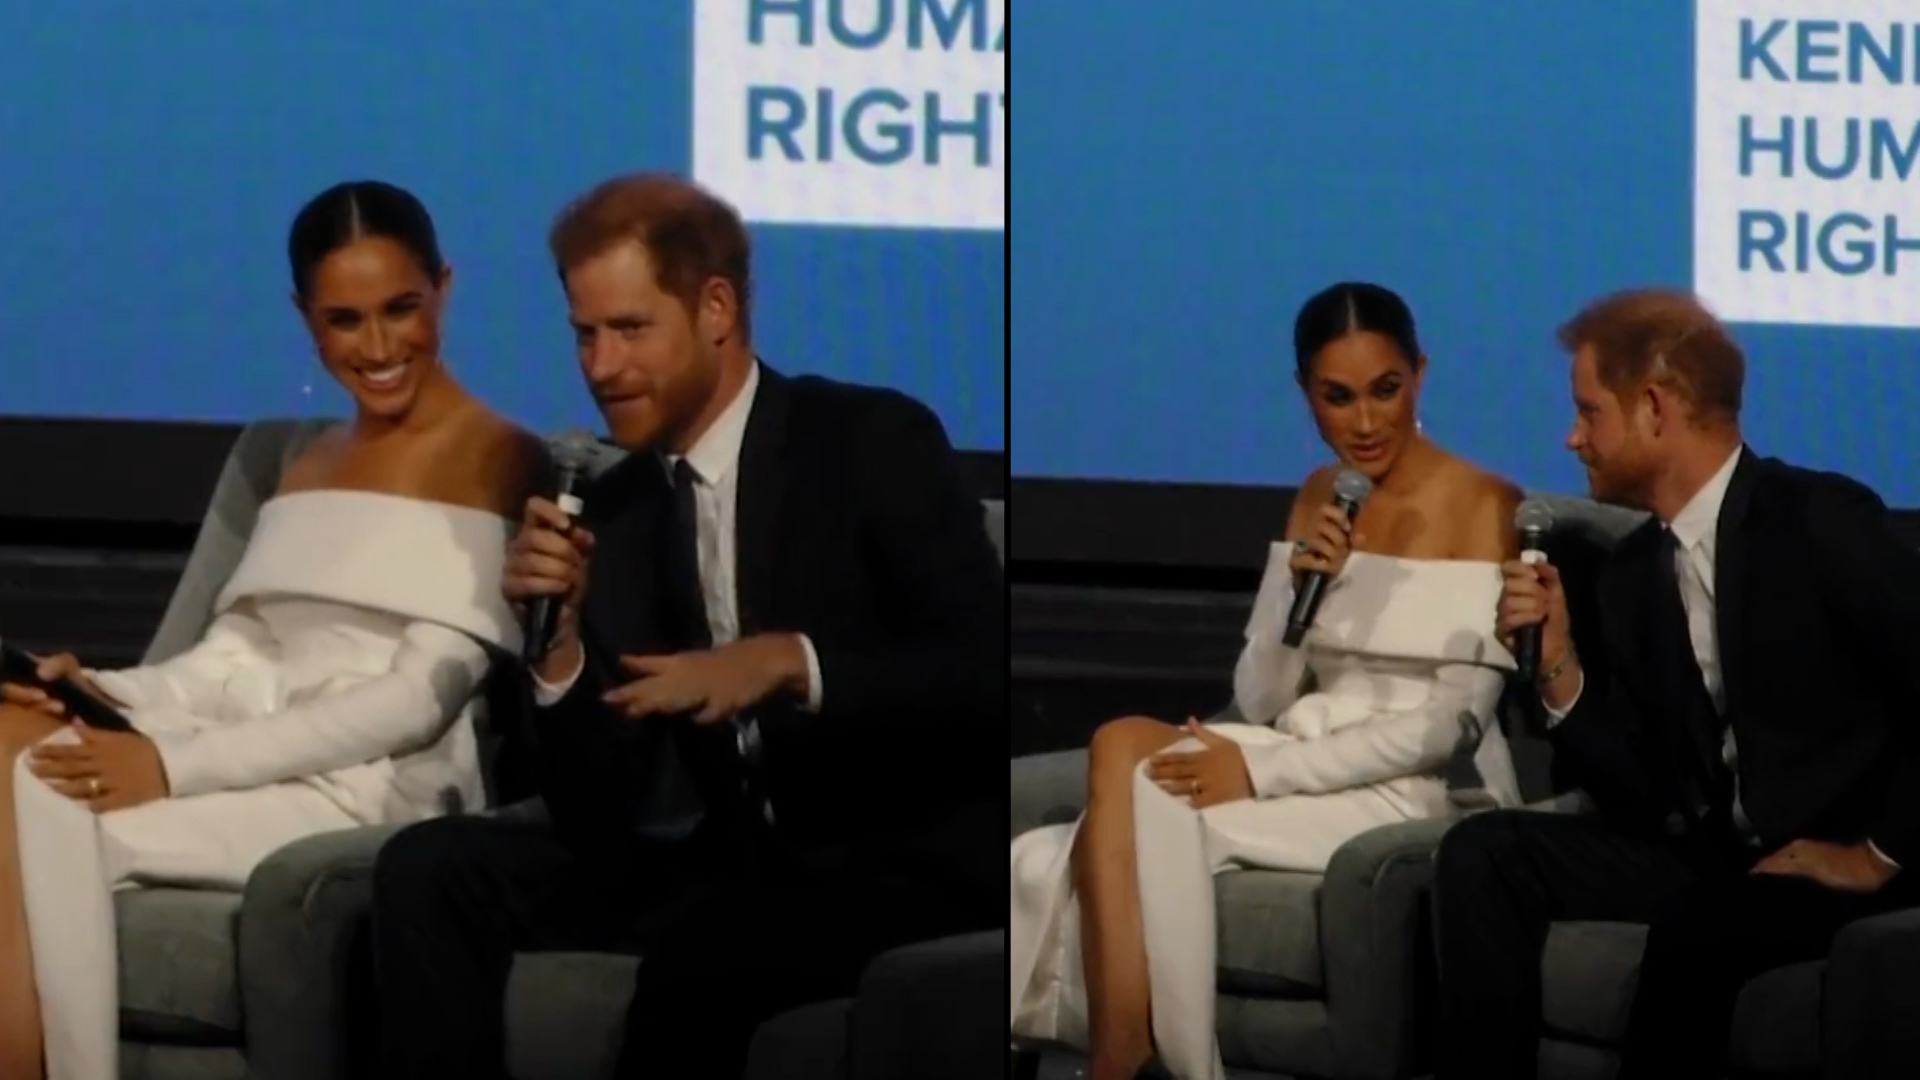 Prince Harry thought he was going on romantic "date night" with Meghan instead of awards ceremony